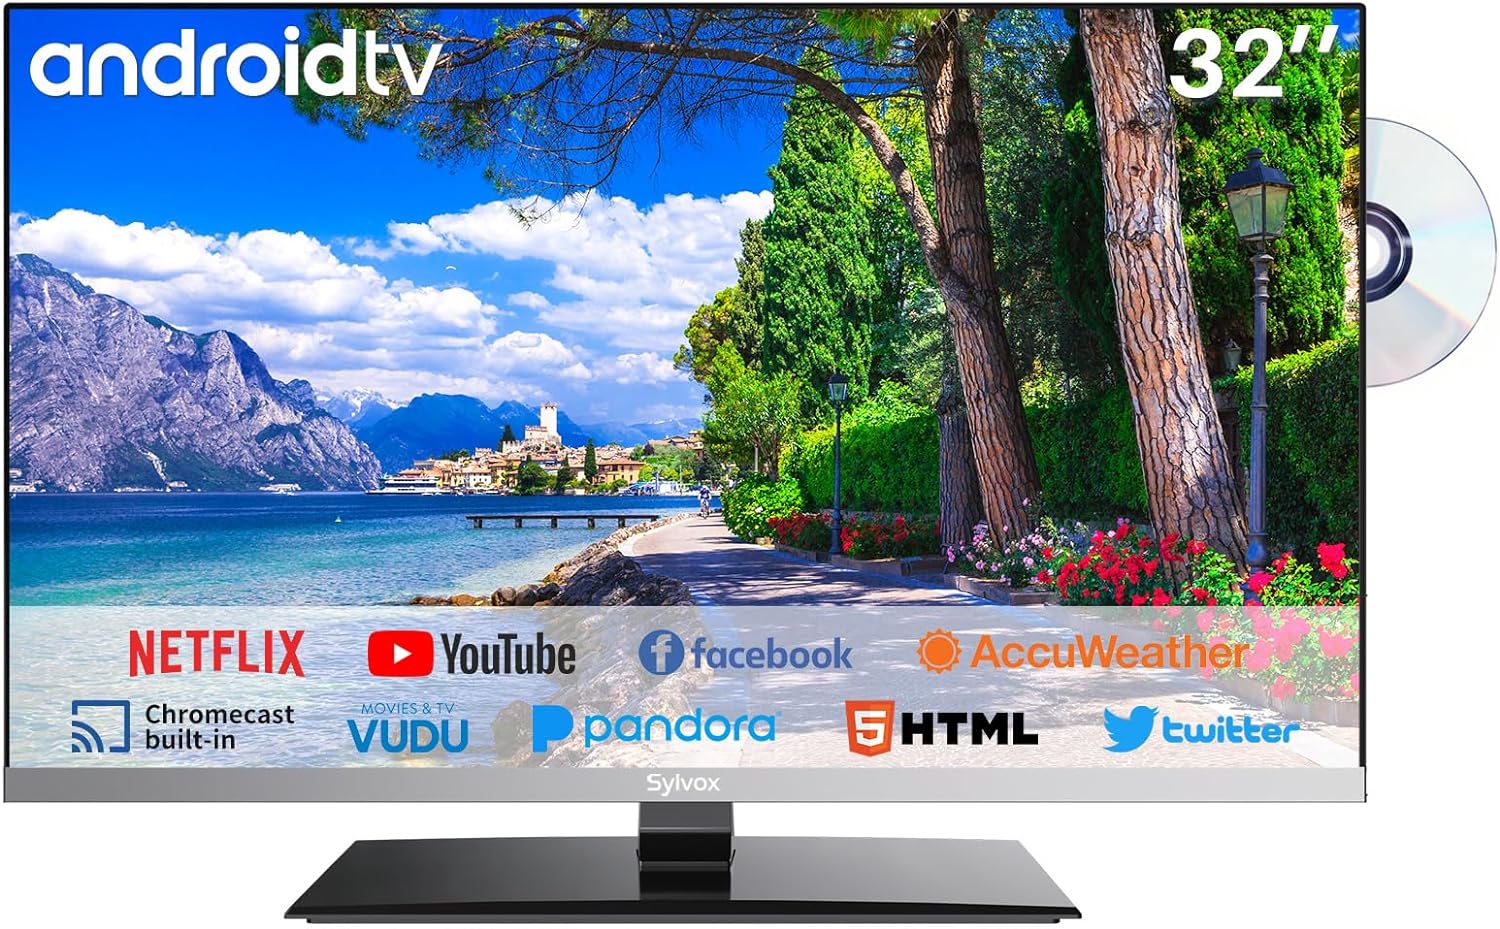 SYLVOX 22 inch Smart TV with DVD Player Built in, Google Play, Frameless RV TV 1080P FHD, WiFi Bluetooth, HDMI USB, Android 12V TV for Motorhomes, Caravans - Limo 2024 - Amazing Gadgets Outlet